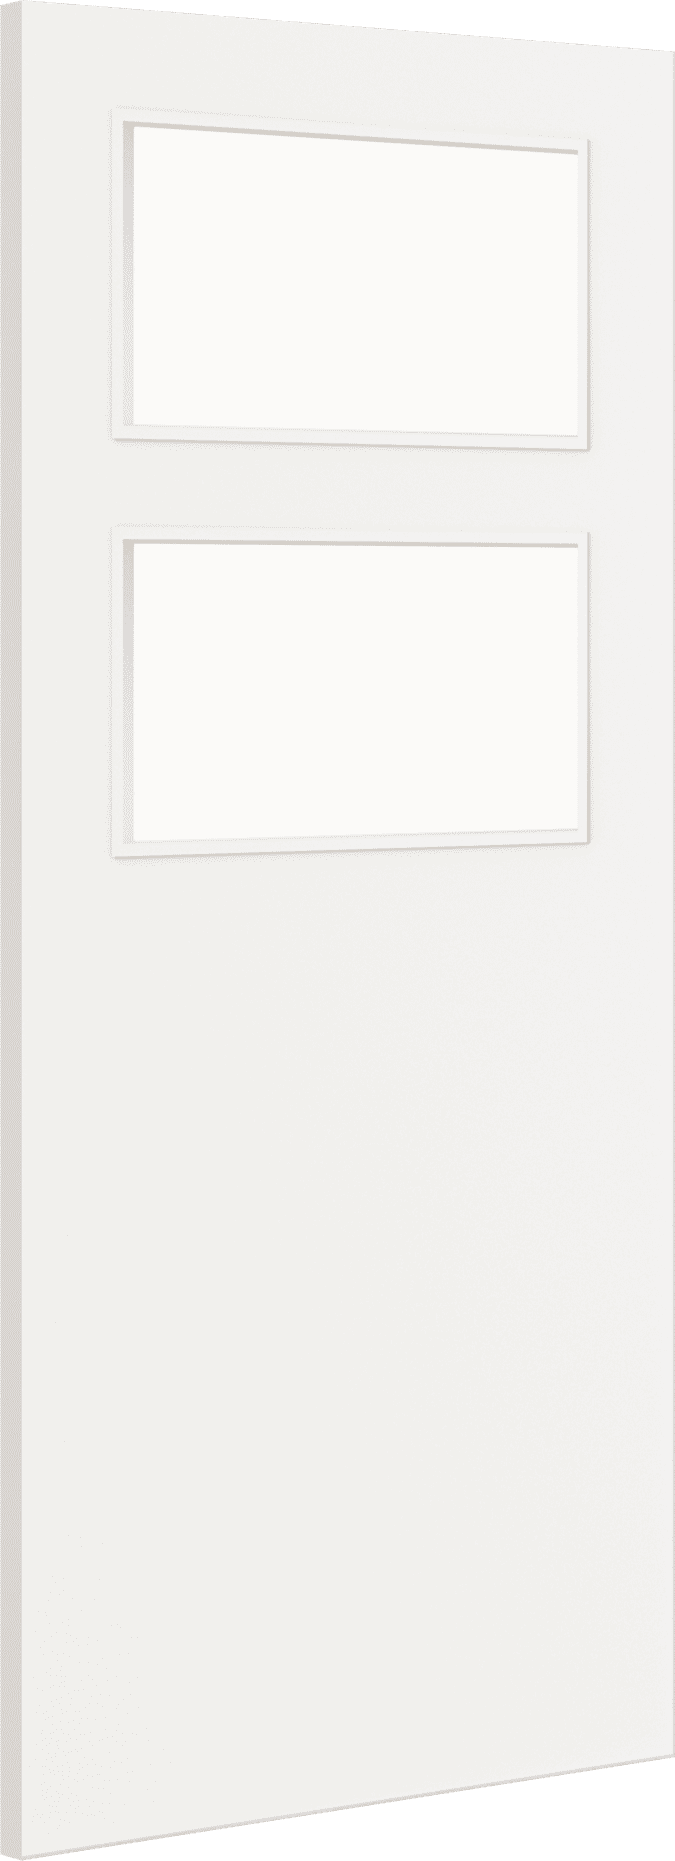 2040mm x 926mm x 44mm Architectural Paint Grade White 02 Clear Glazed Fire Door Blank